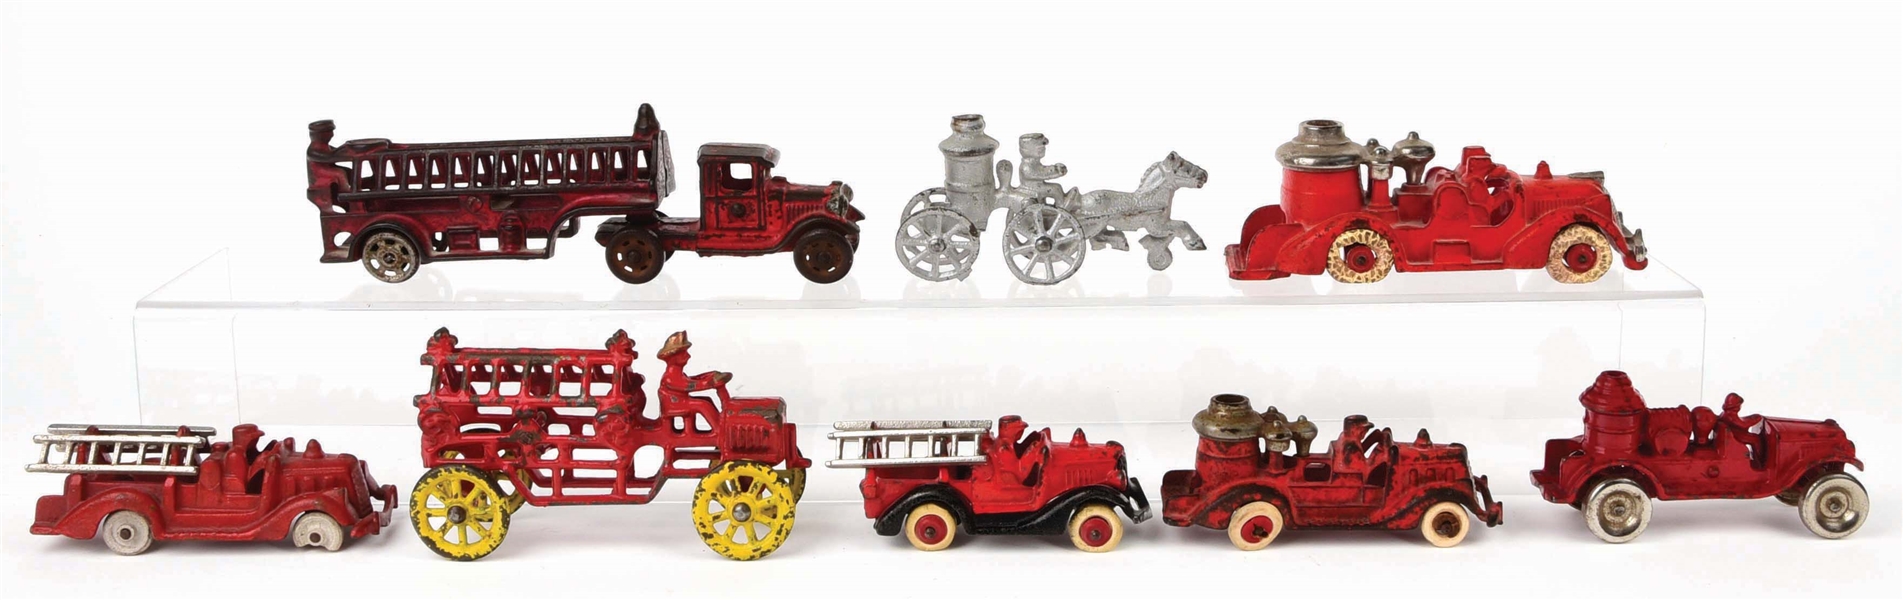 LOT OF 8: AMERICAN MADE CAST-IRON FIRE LADDER AND PUMPER TRUCKS. 